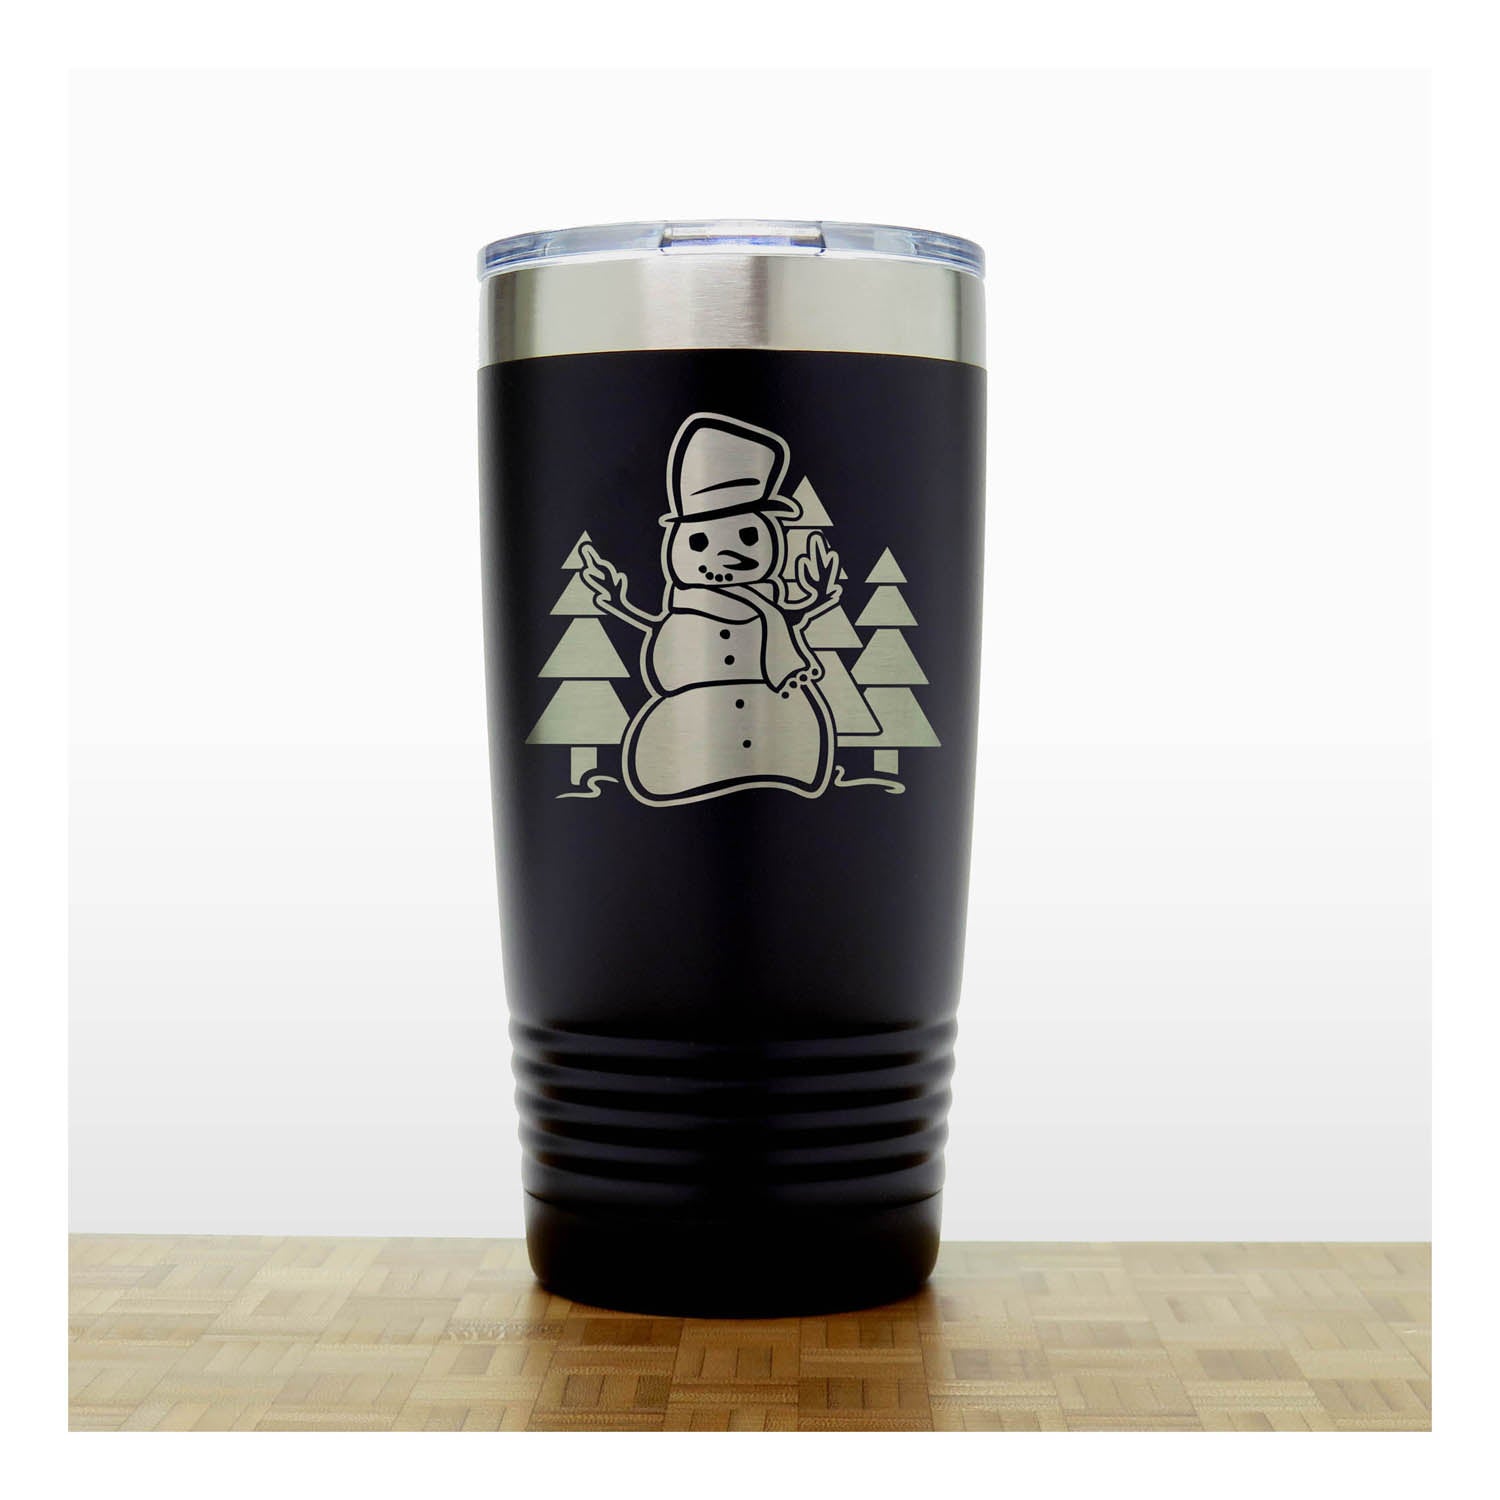 Black 20 oz Insulated Tumbler with the design of a snowman standing in front of Christmas trees - Copyright Hues in Glass